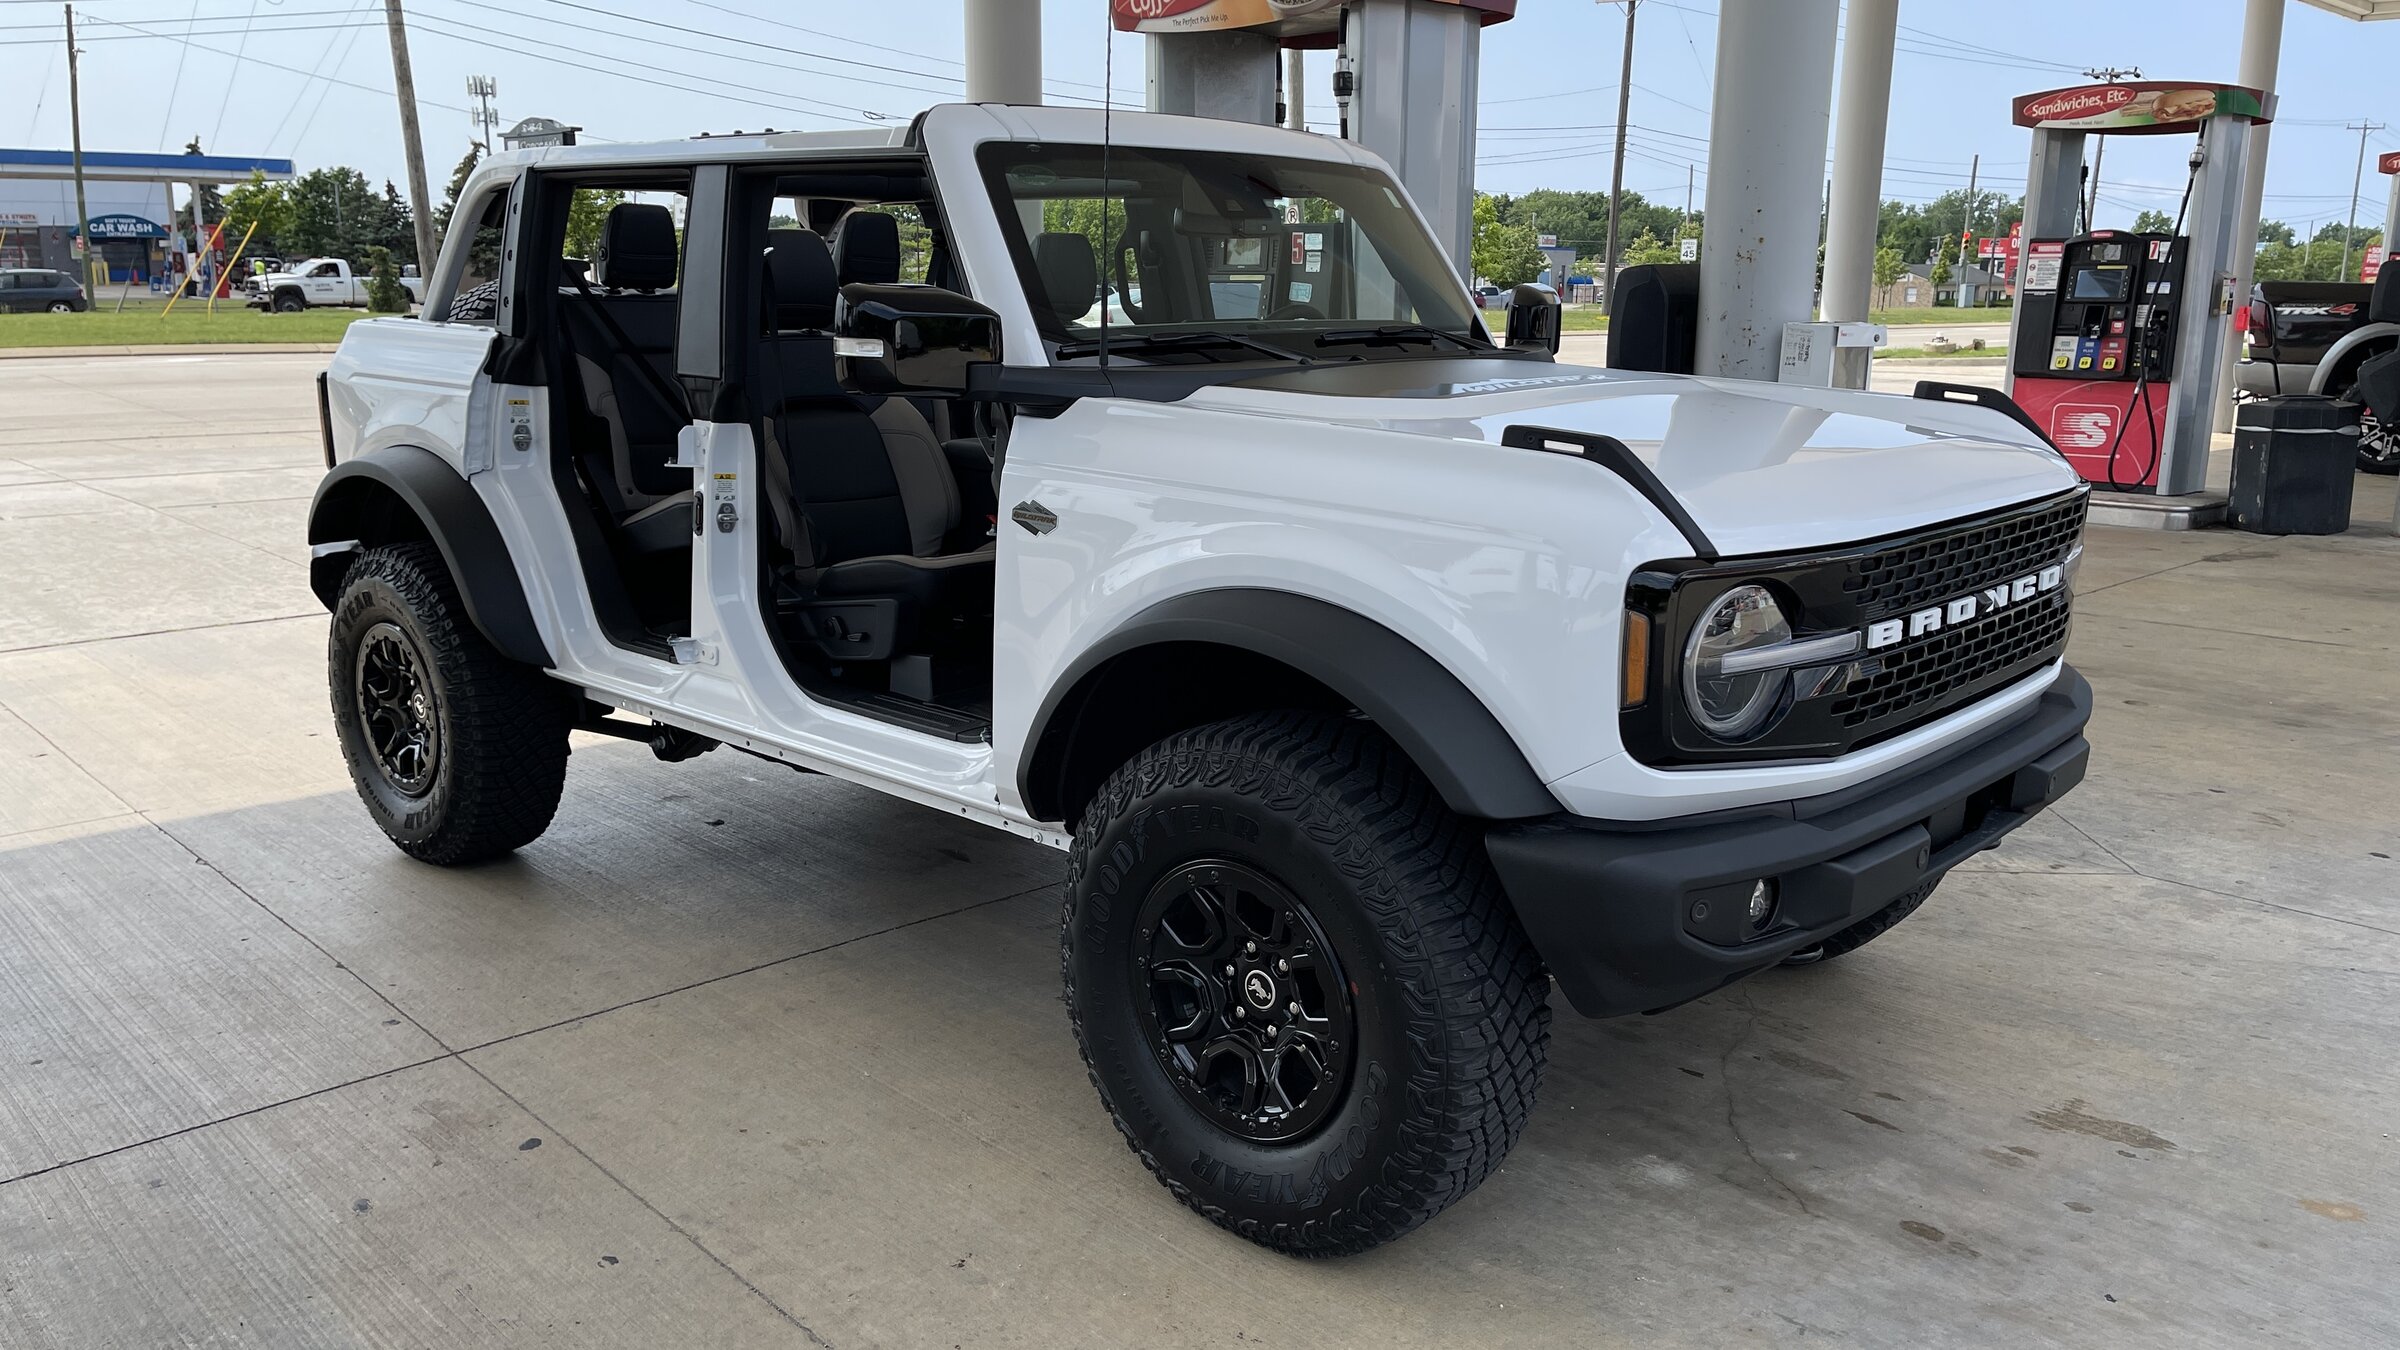 Ford Bronco Let’s see your doors off pics… 5755CB19-8A11-4425-A94C-5604D54C6808